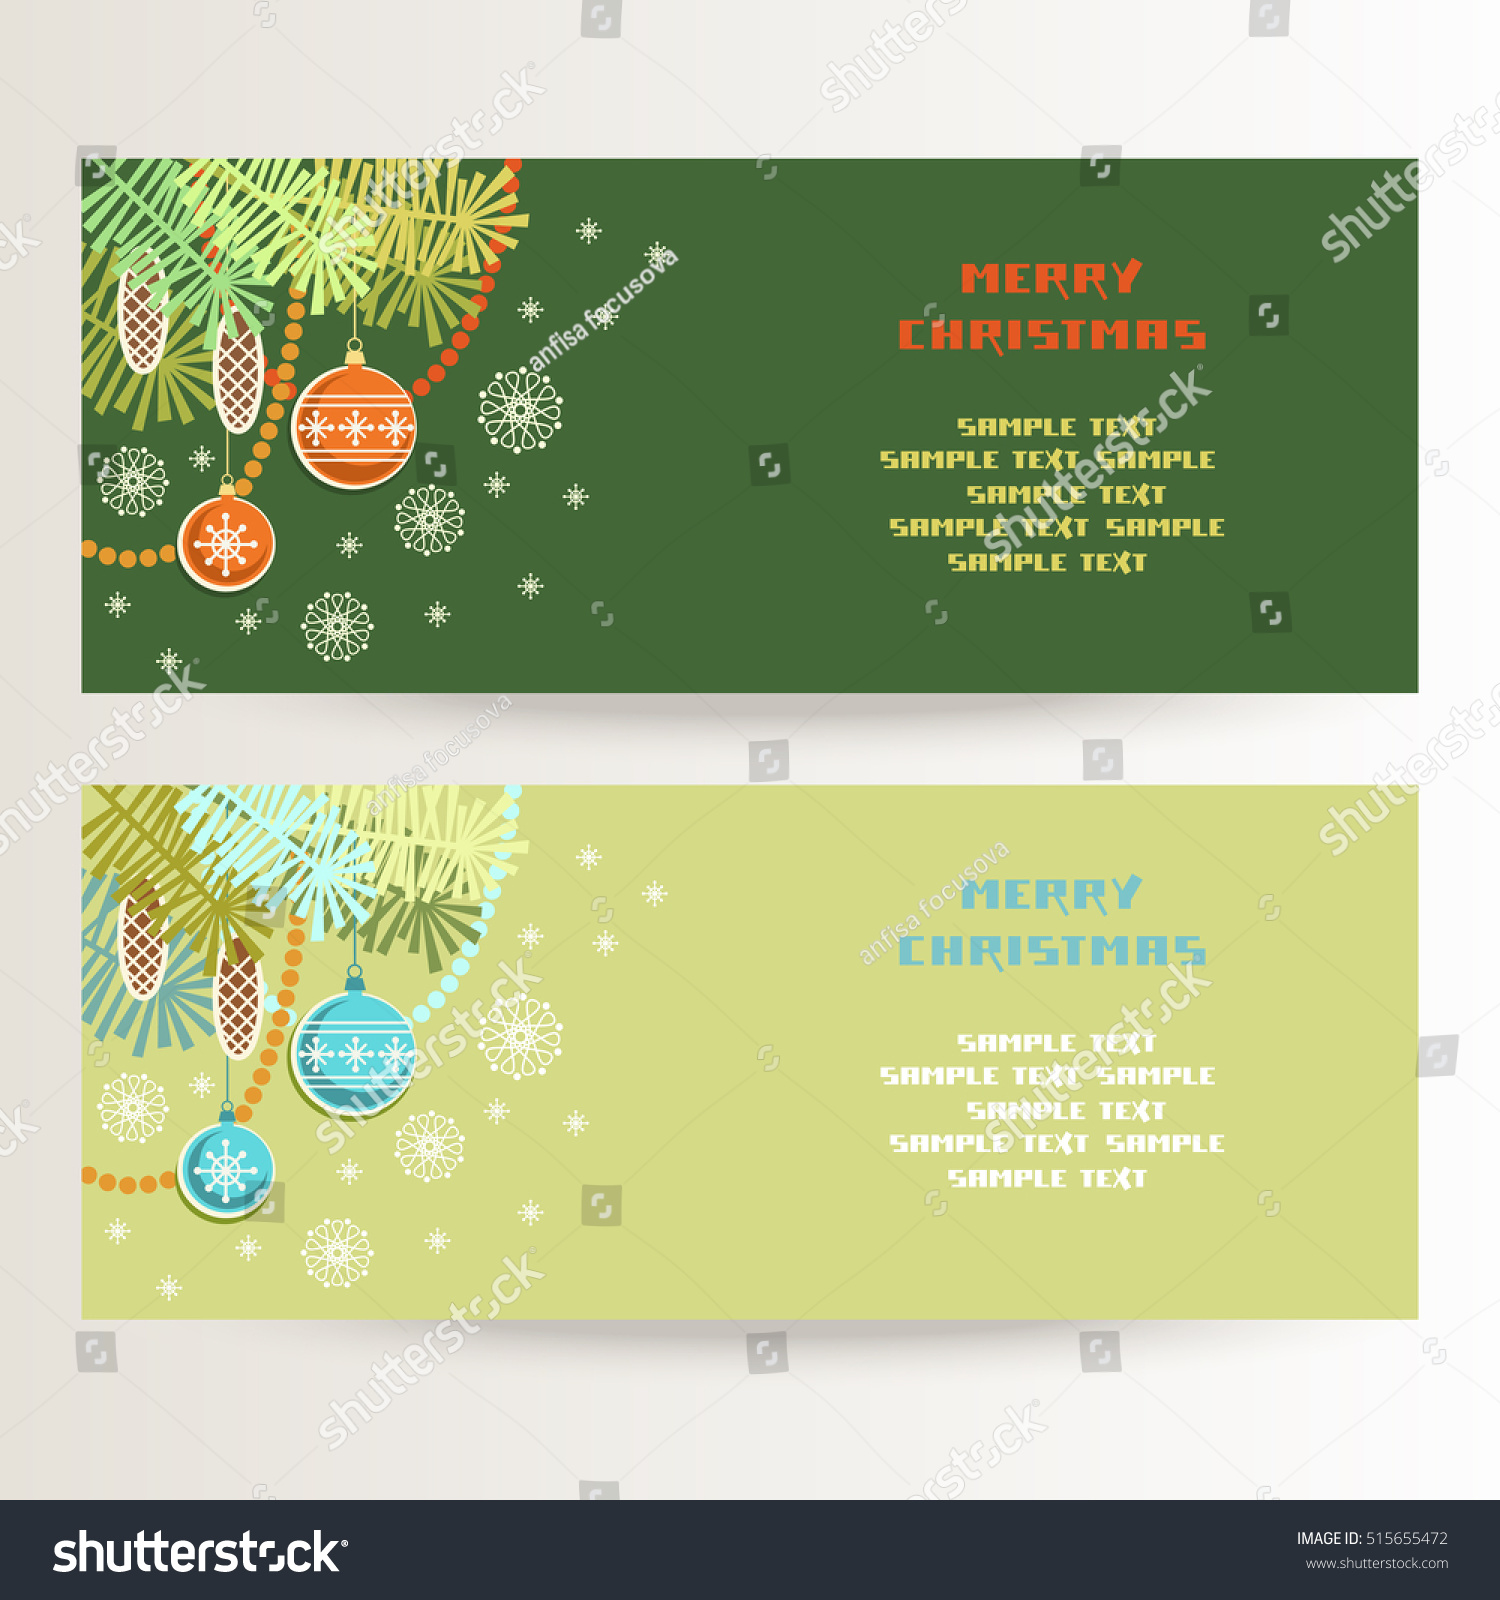 Set of Christmas banner with snowflakes and decoration Festive green template with text box for